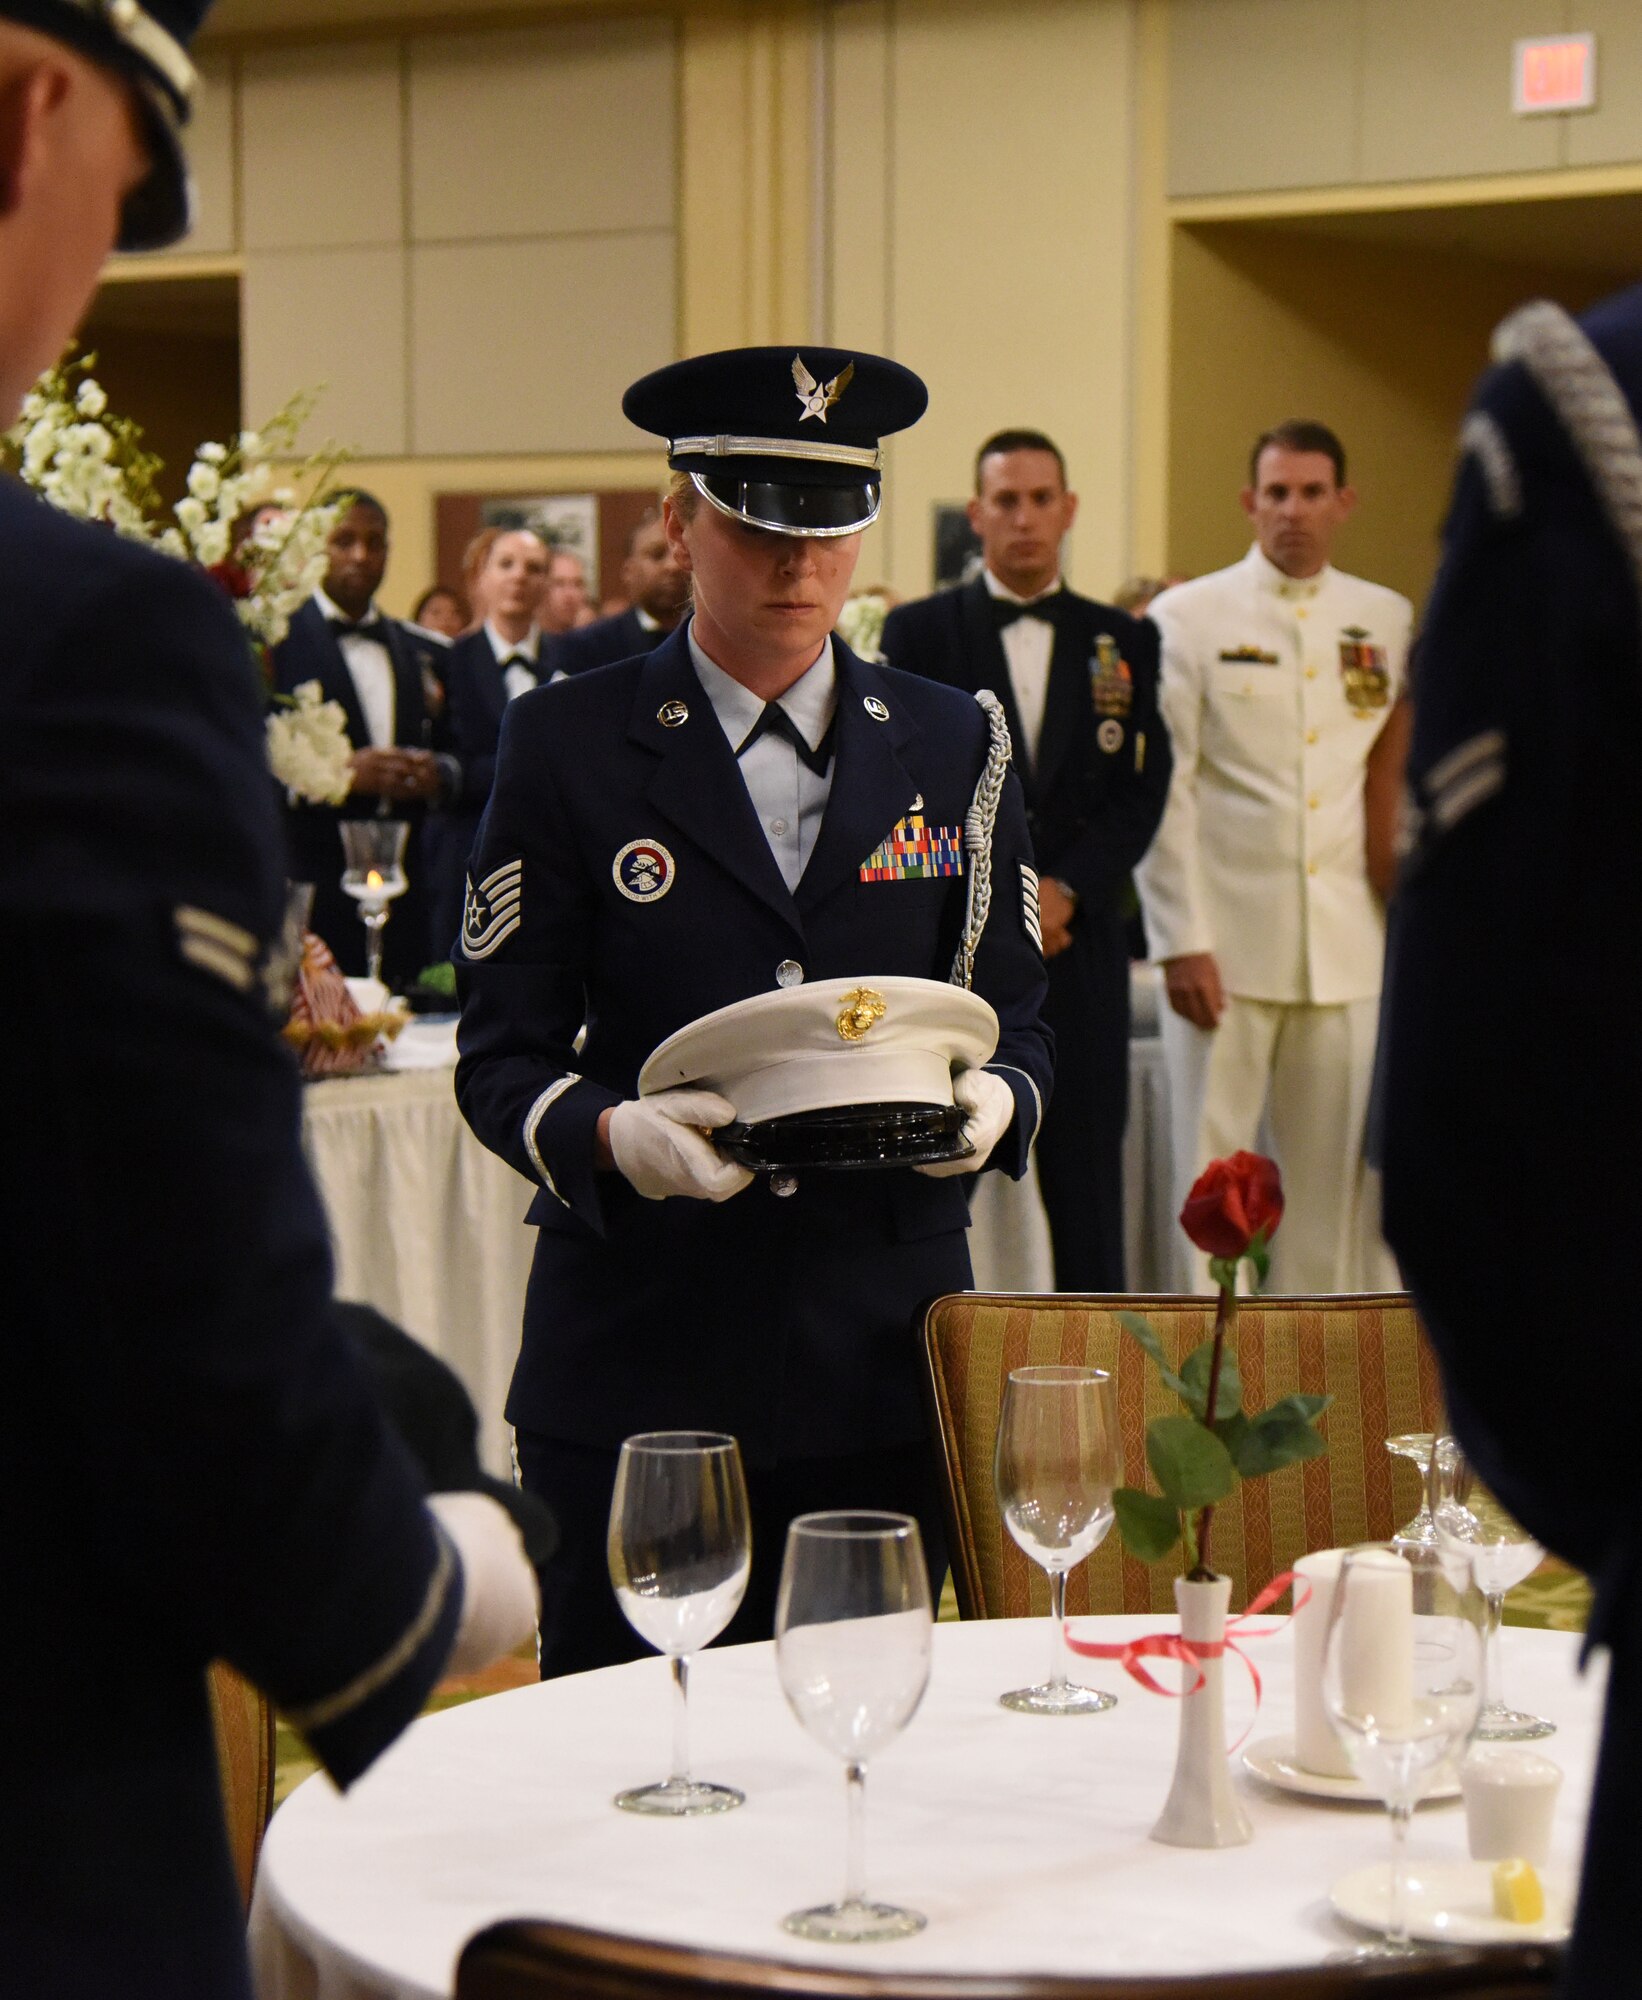 Tech. Sgt. Heather Starnes, Keesler Honor Guard member, participates in a POW/MIA table ceremony during the U.S. Air Force 70th Birthday Ball at the Bay Breeze Event Center Sept. 16, 2017, on Keesler Air Force Base, Mississippi. The event, hosted by the 81st Training Wing and the John C. Stennis Chapter of the Air Force Association, also paid tribute to all prisoners of war and military members still missing in action. (U.S. Air Force photo by Kemberly Groue)